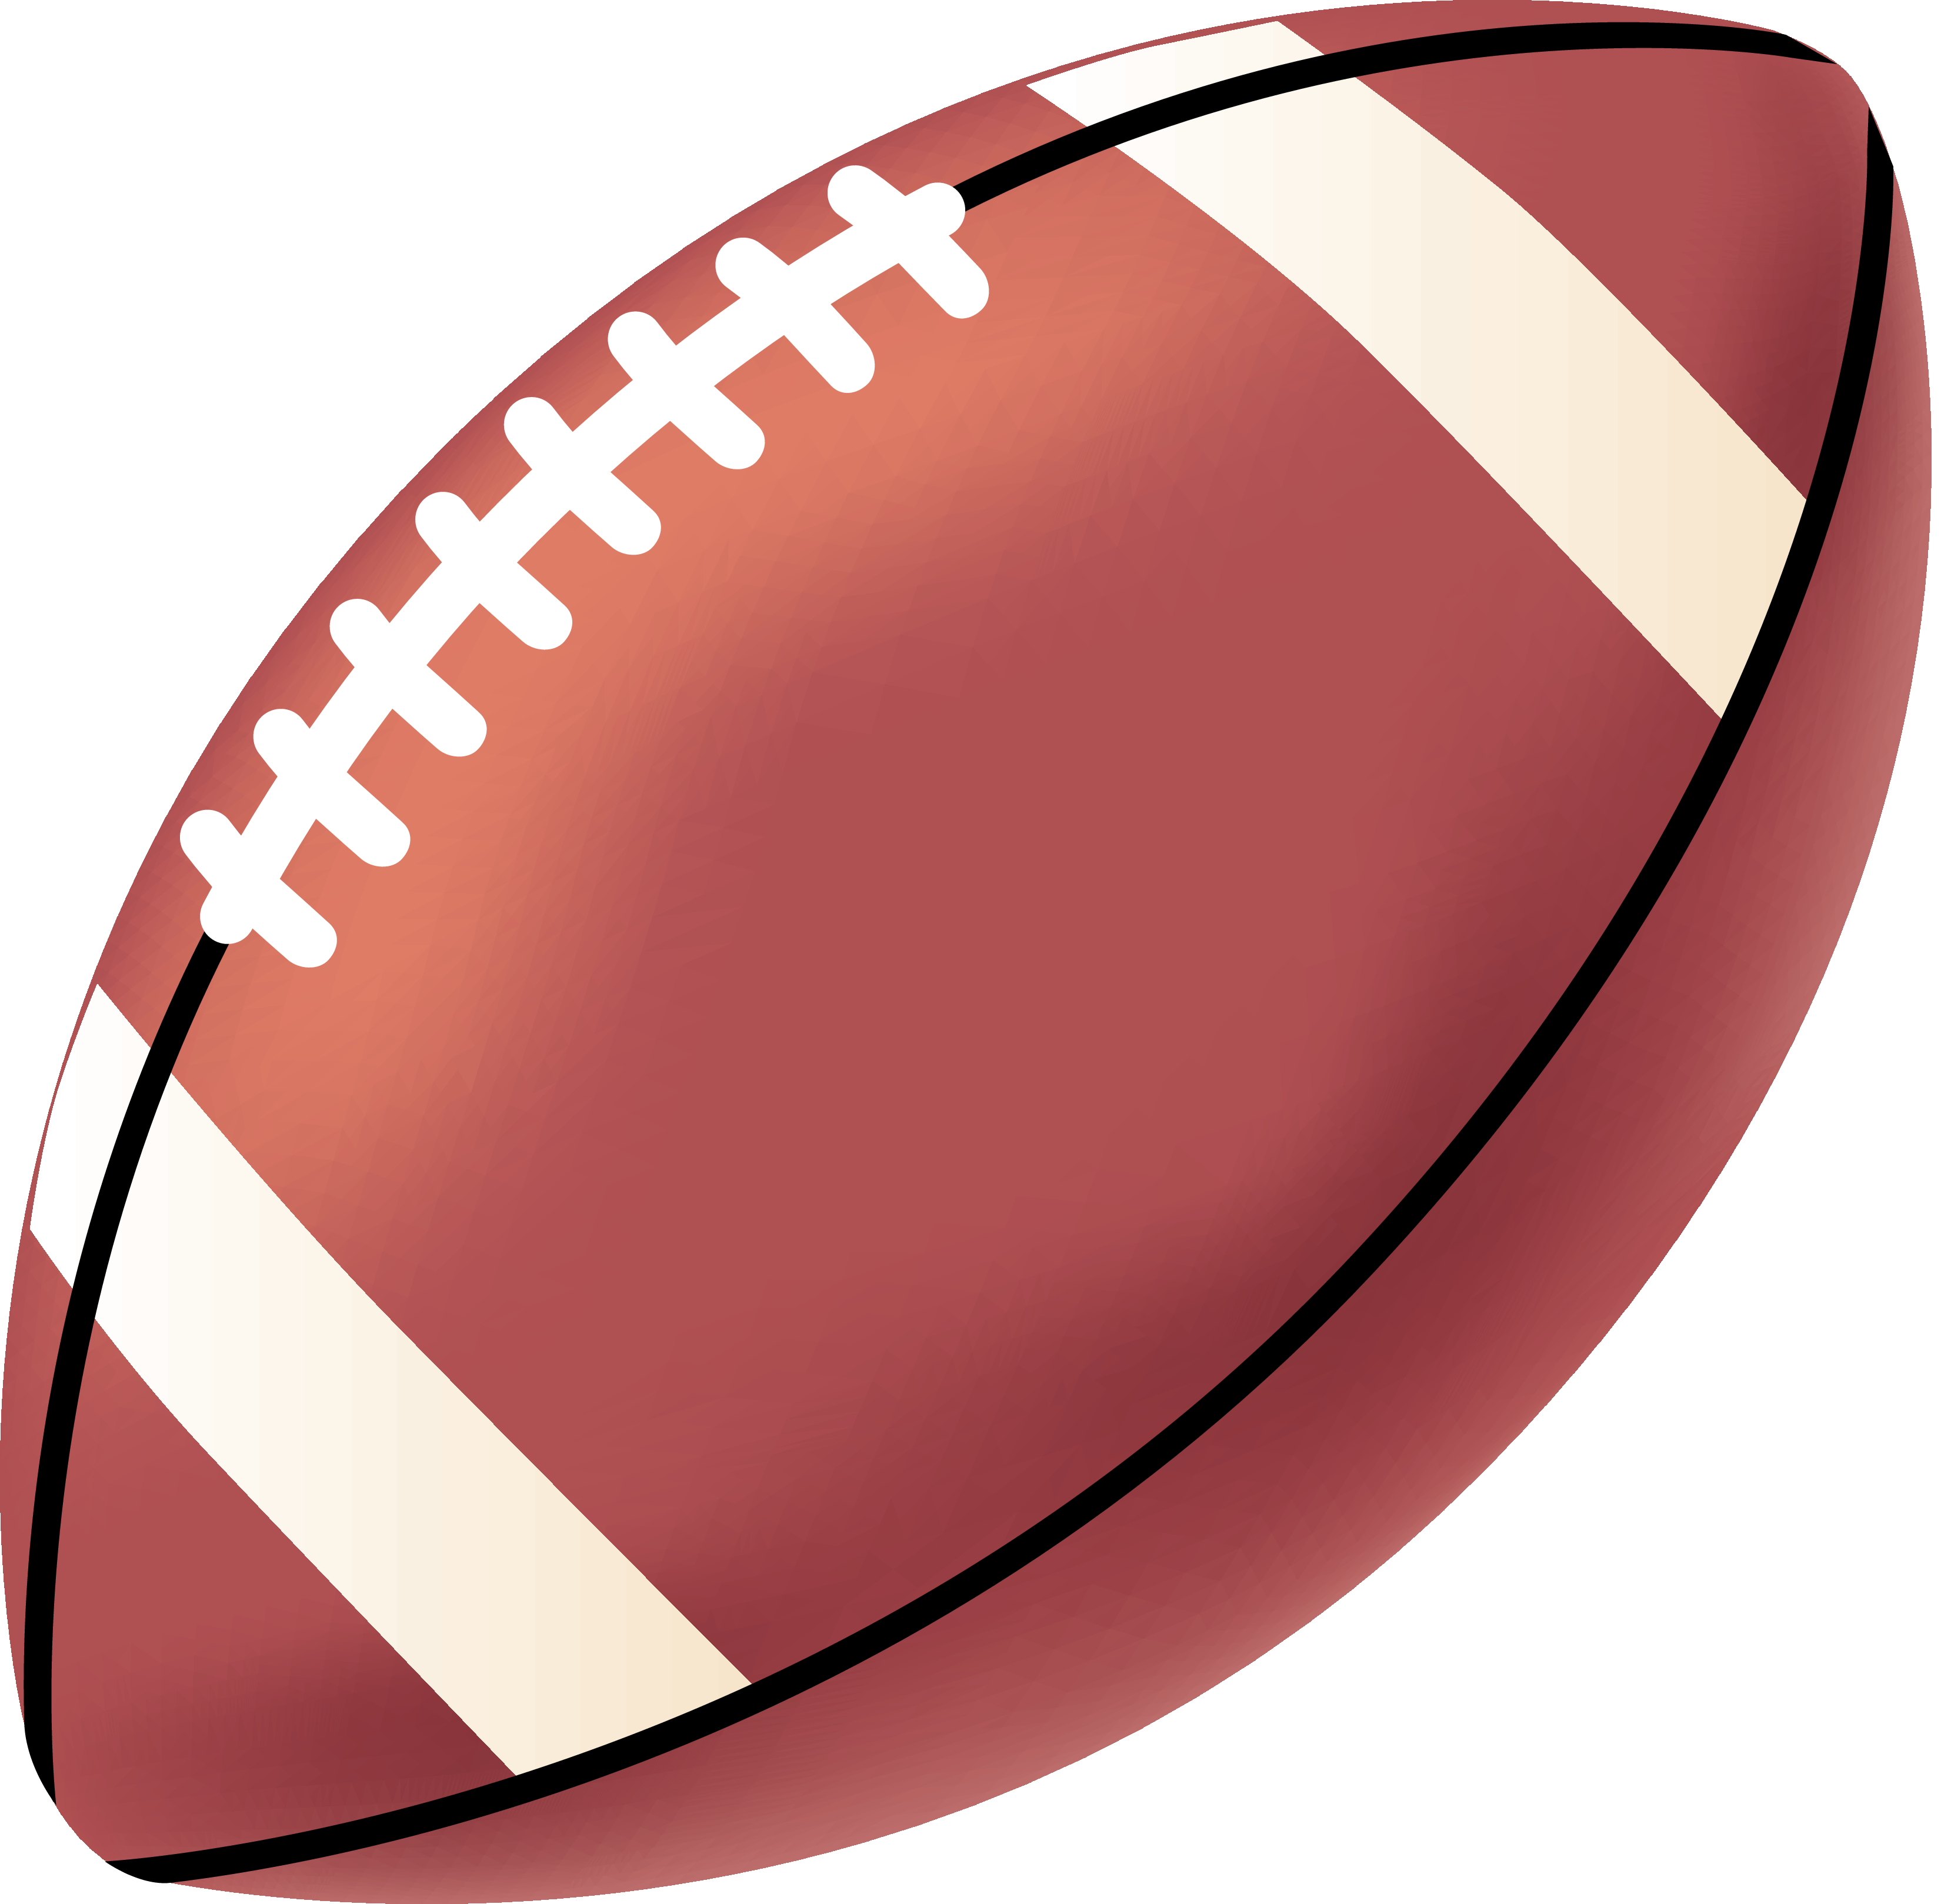 Clipart sports doodle. Free printable football at